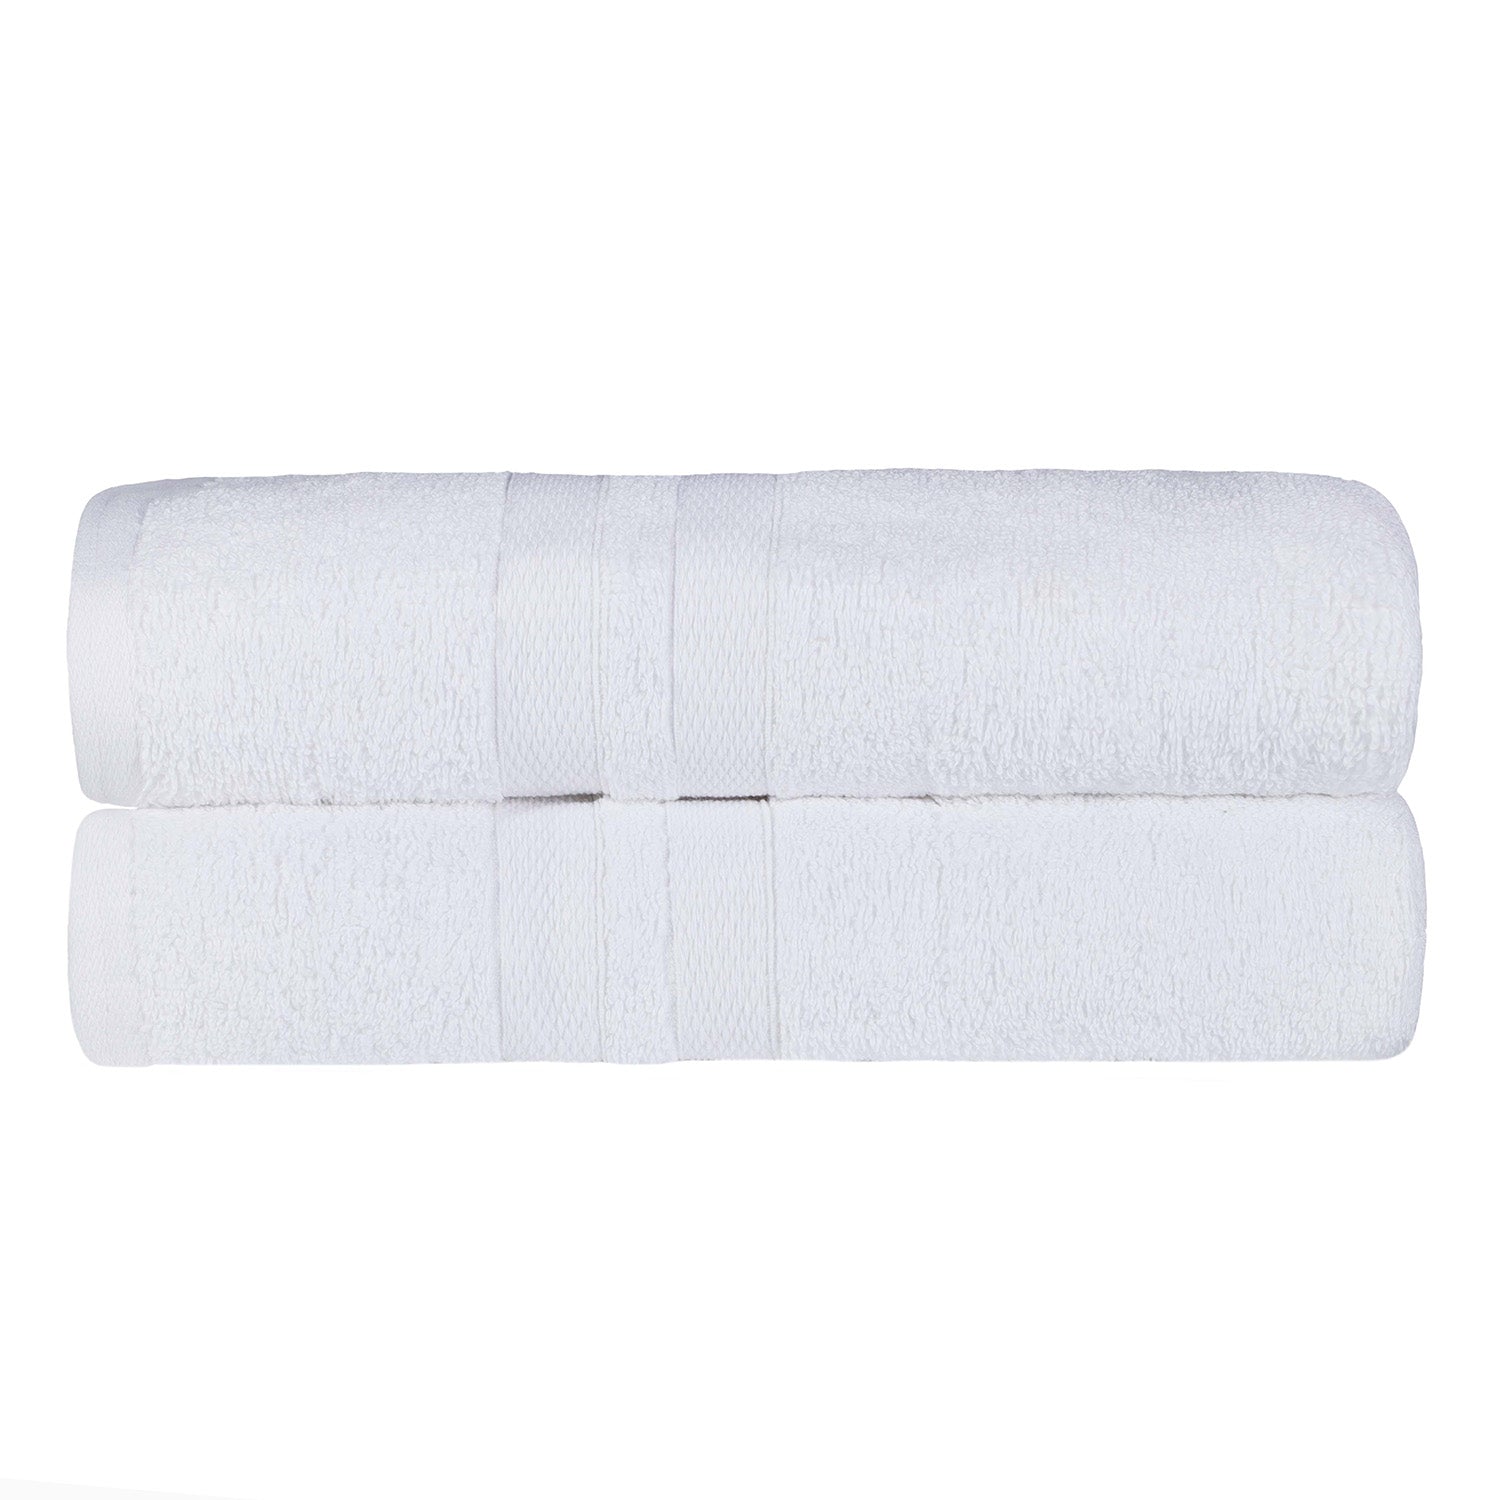 Superior Ultra Soft Cotton Absorbent Solid Bath Sheet (Set of 2) - White